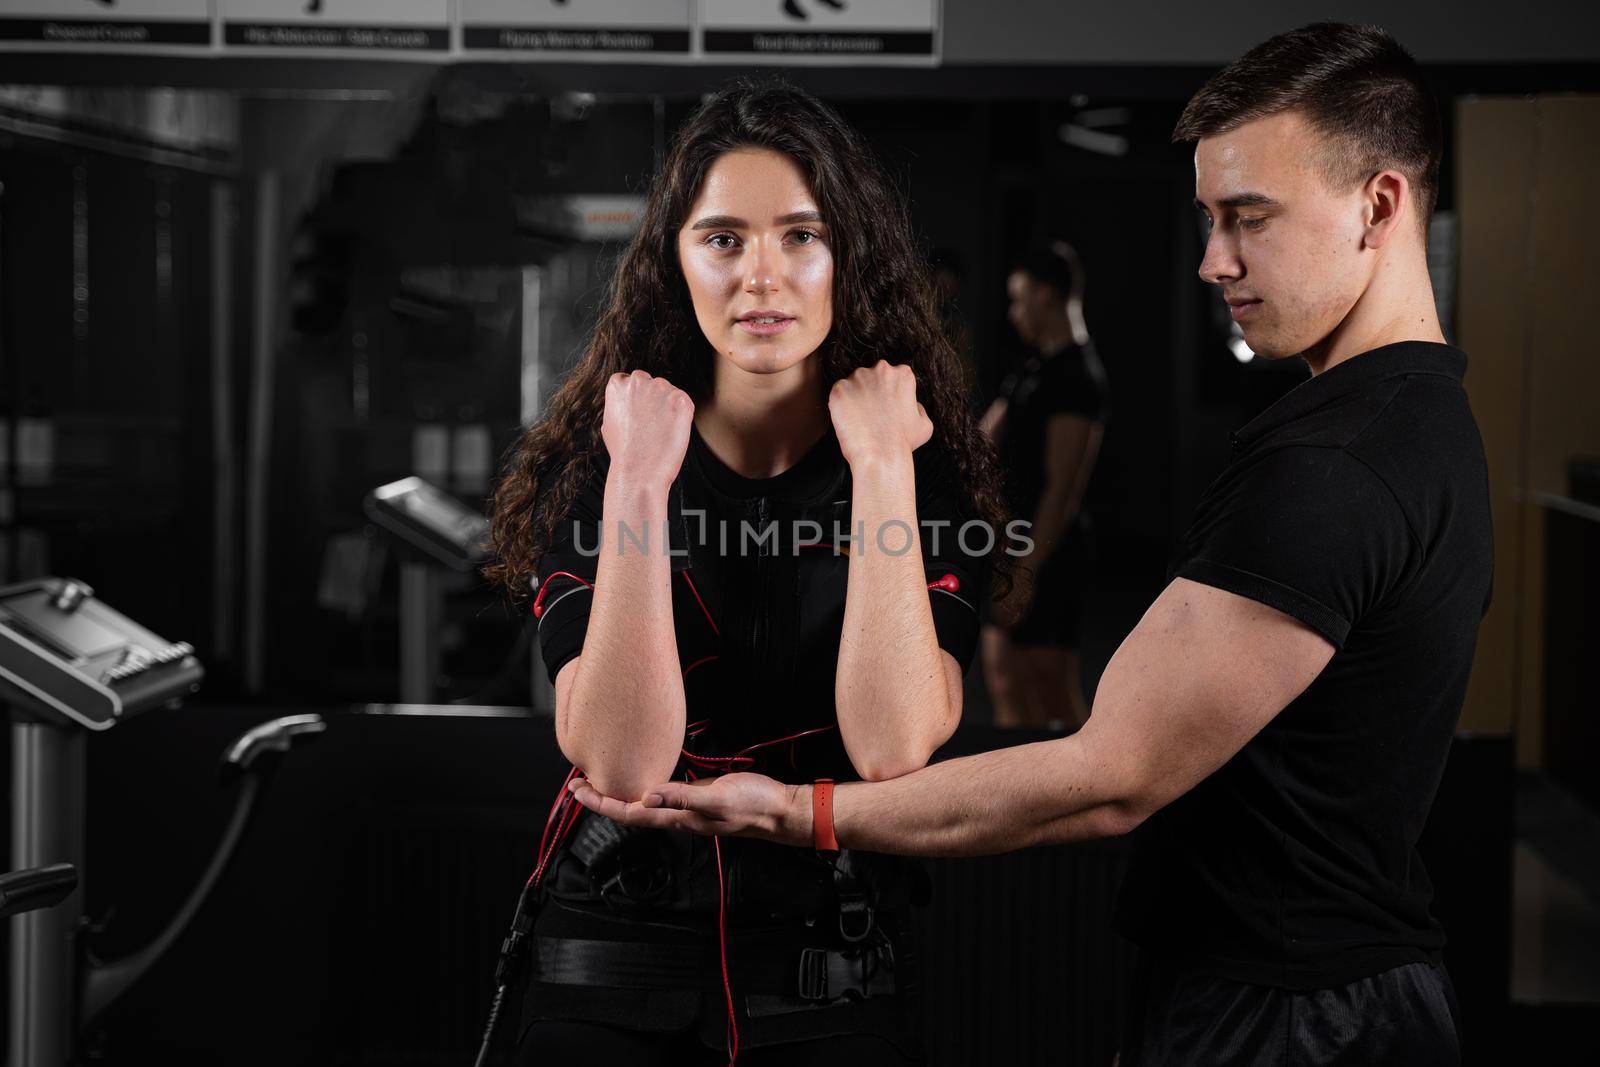 Man trainer trains a girl in an EMS suit in the gym. Electrical stimulation of the misc during active training.